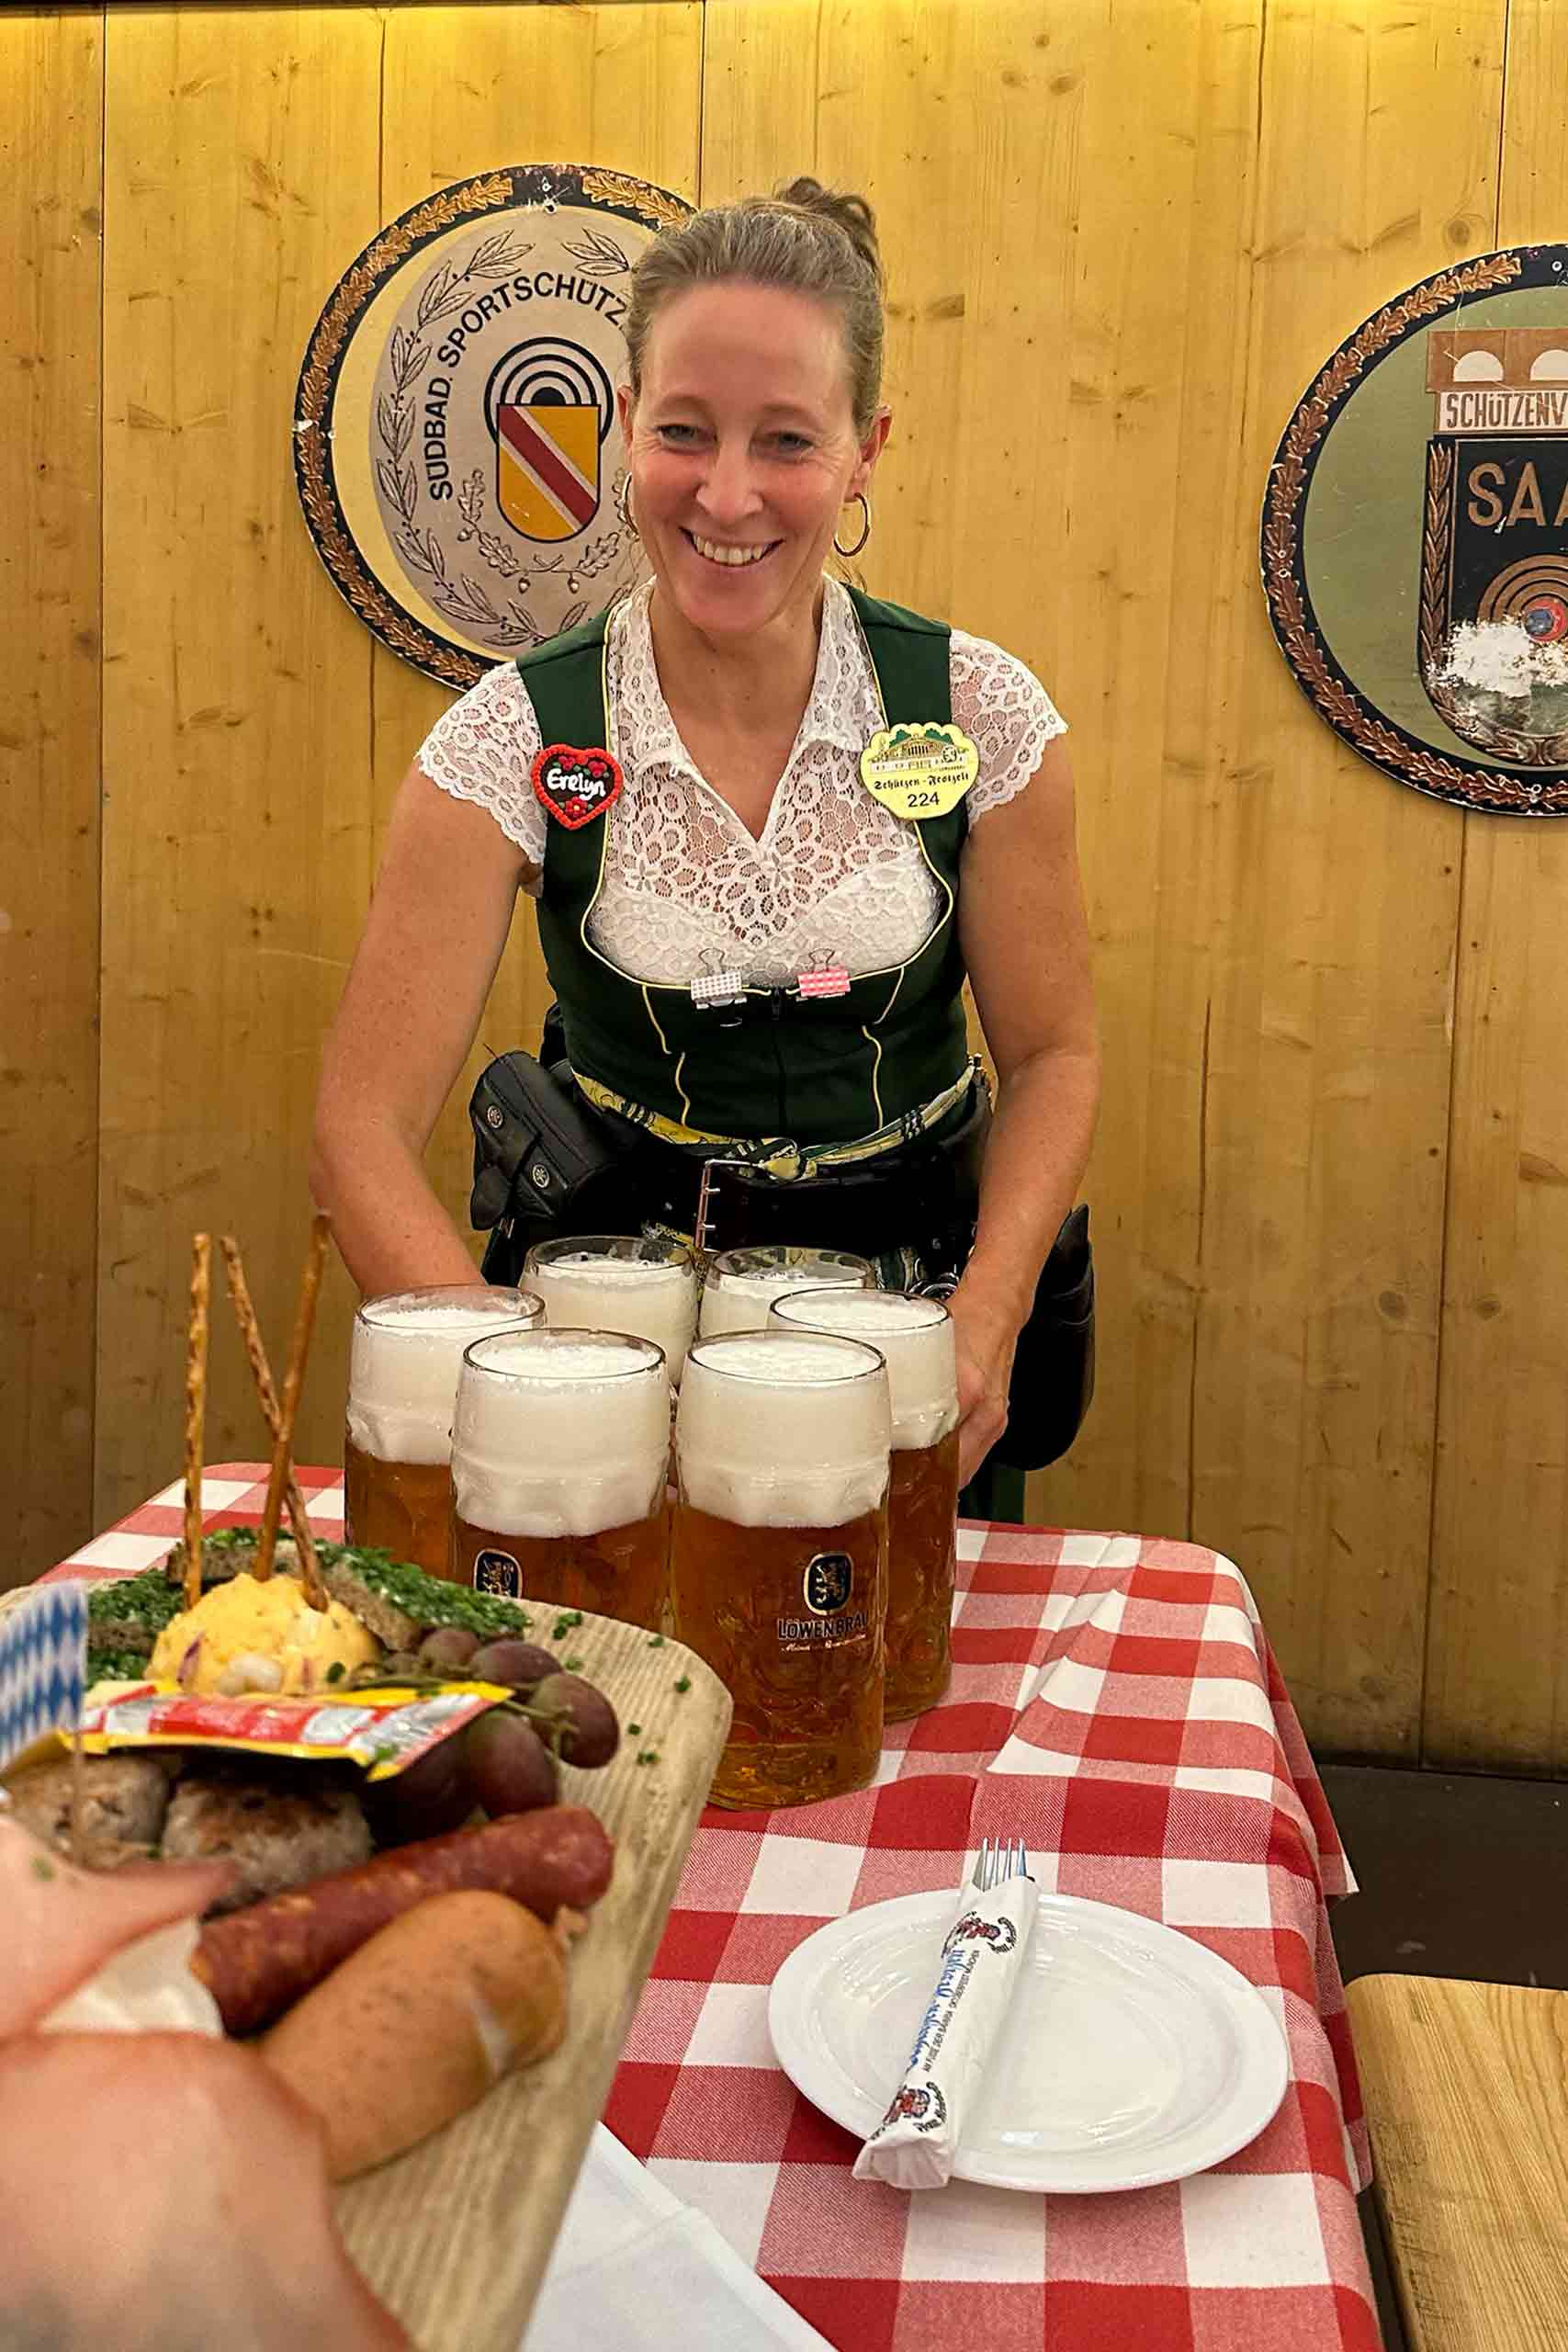 A traditionally dressed female staff member carrying large jugs of beer at the MOktoberfest.